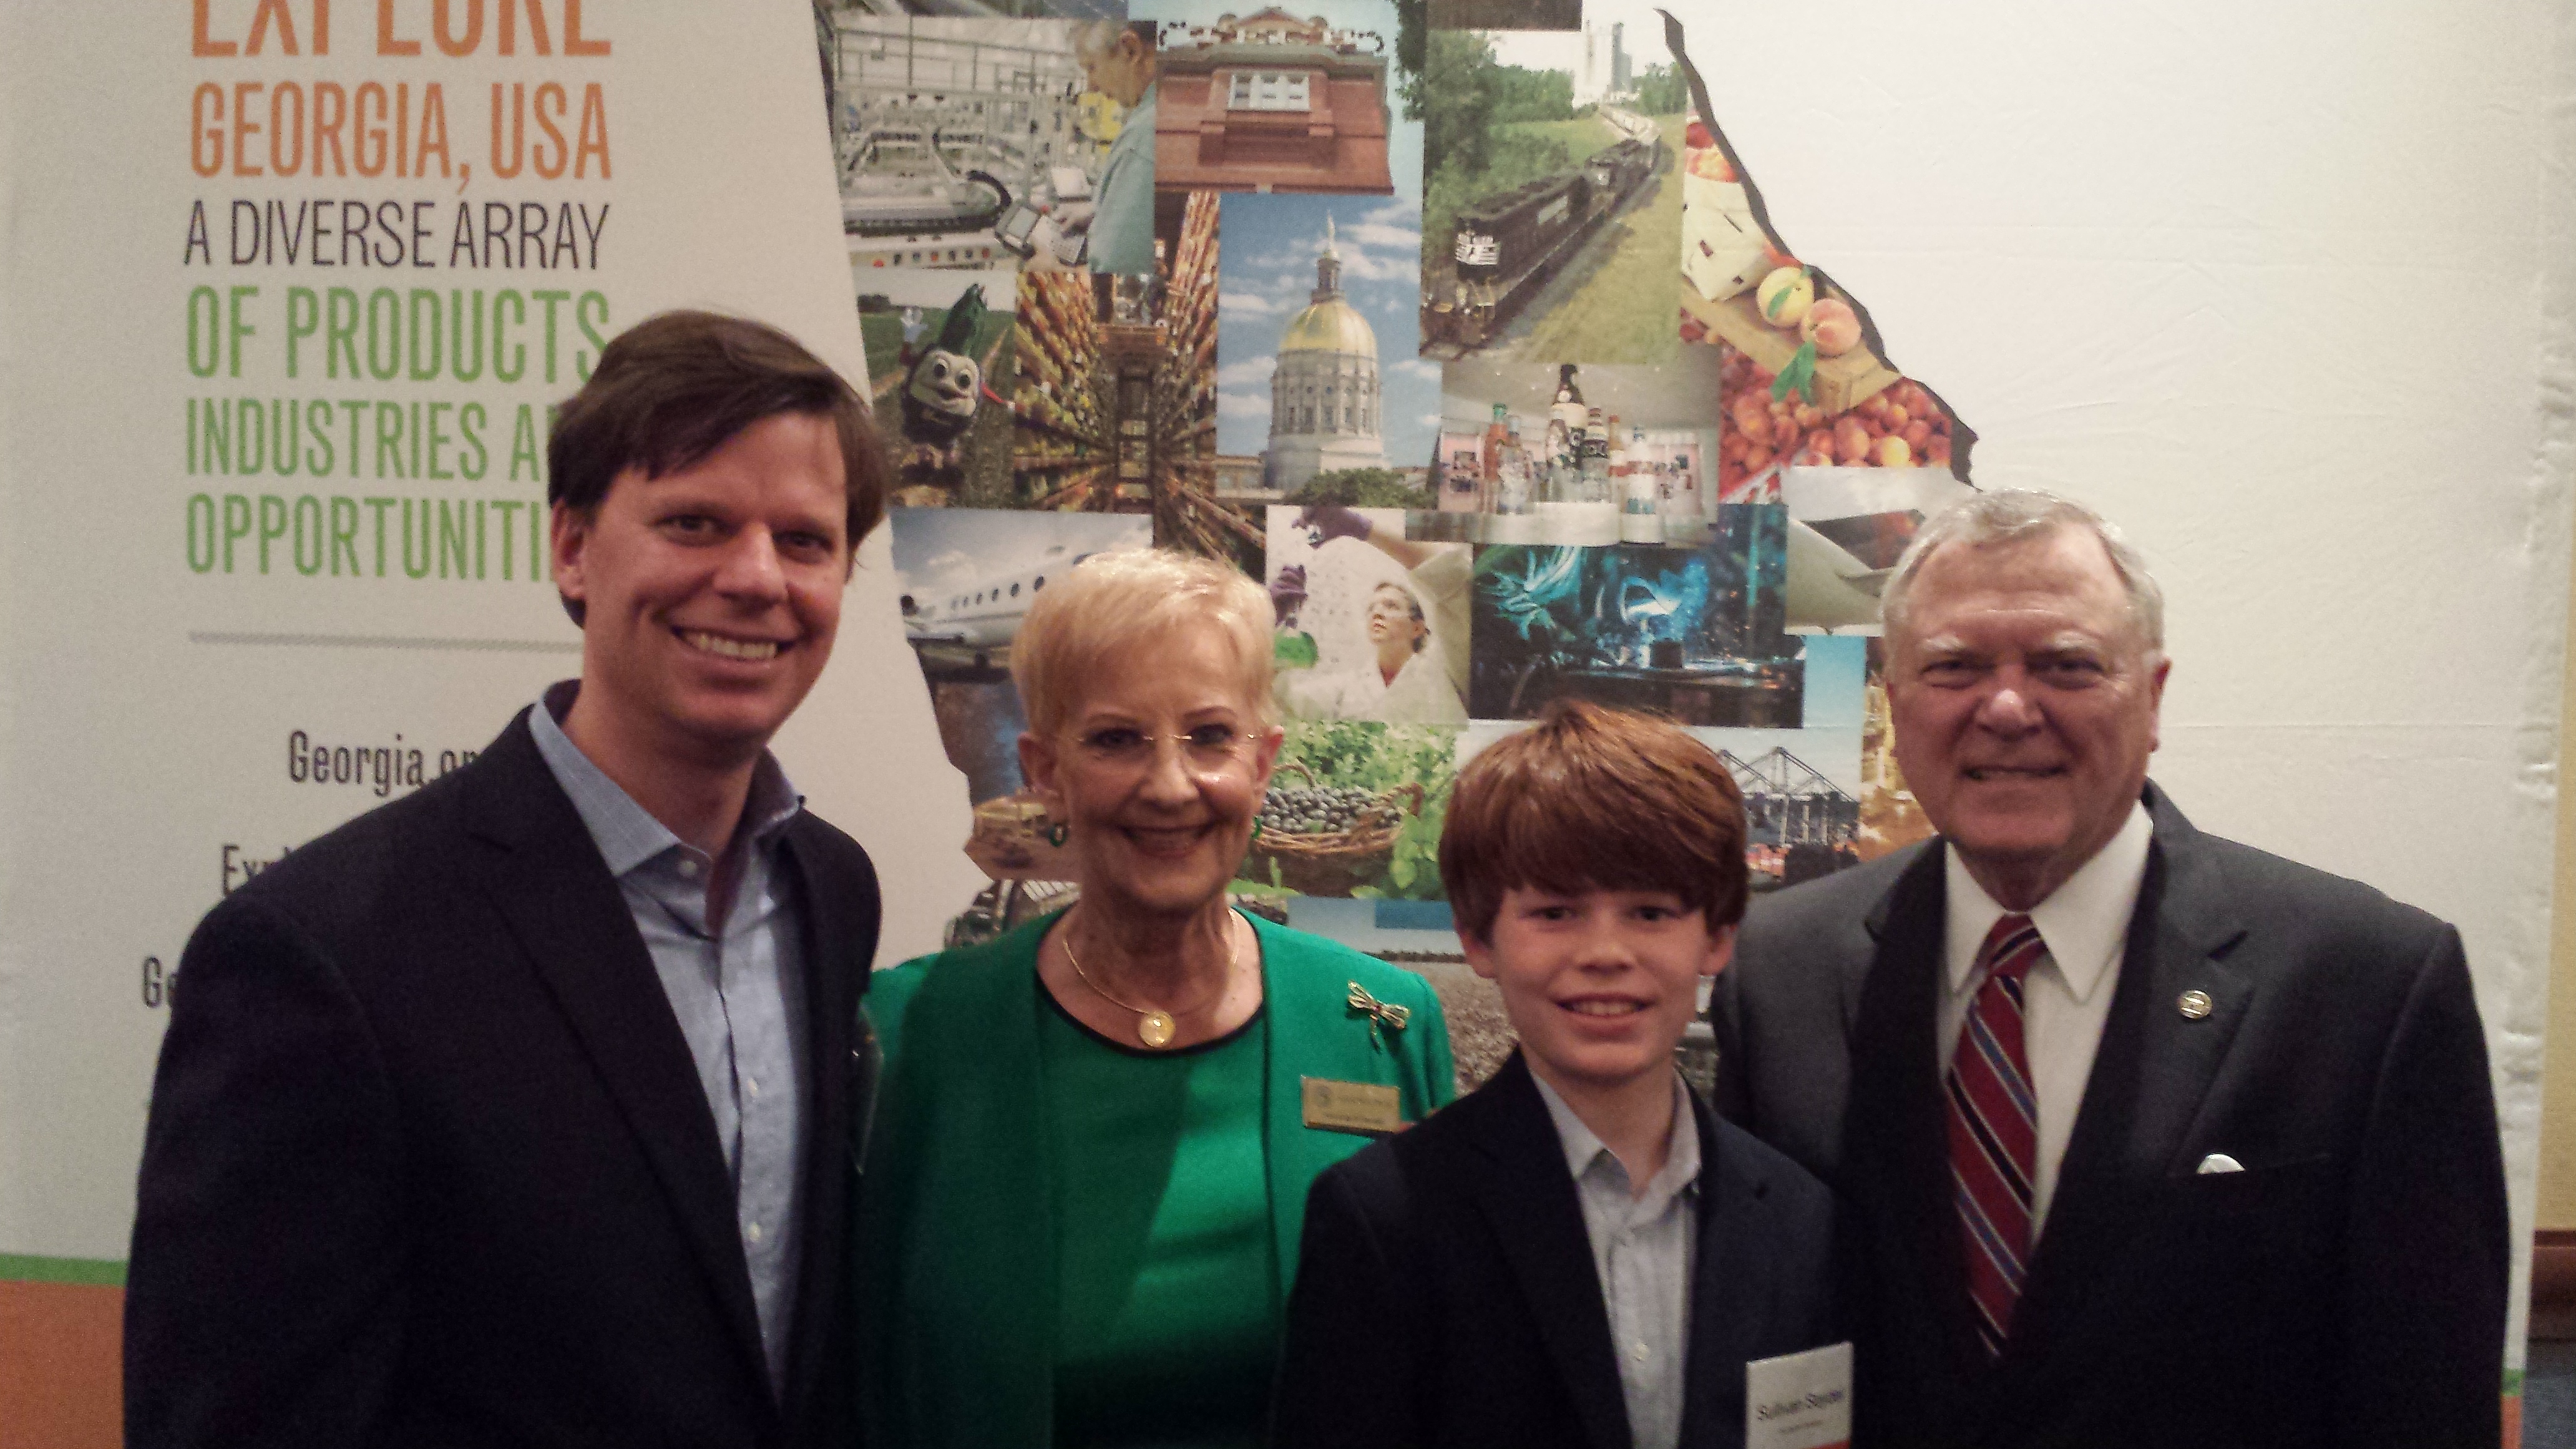 Scott O. Seydel, Jr. of the Seydel Companies, and son, Sullivan Seydel, with Governor and Mrs. Nathan Deal at the Georgia Department of Economic Development GLOBE awards.